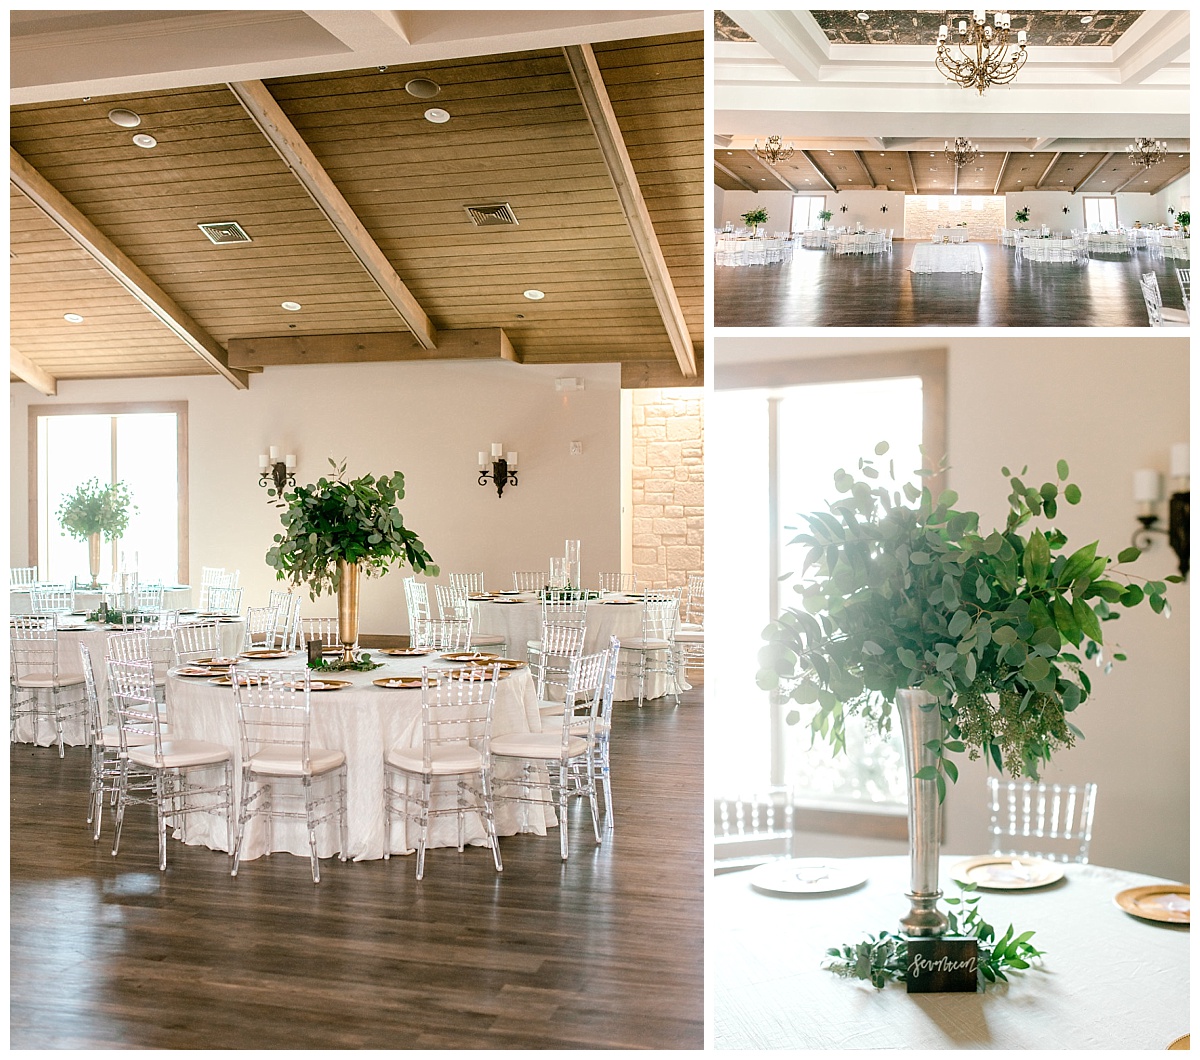 Hidden Pines,Highland Village,Dallas,greenery,Bethany Erin,Natural,Texas,Wedding,flowers,bouquets,centerpieces,A & L Floral Design,Smilax,Mantle